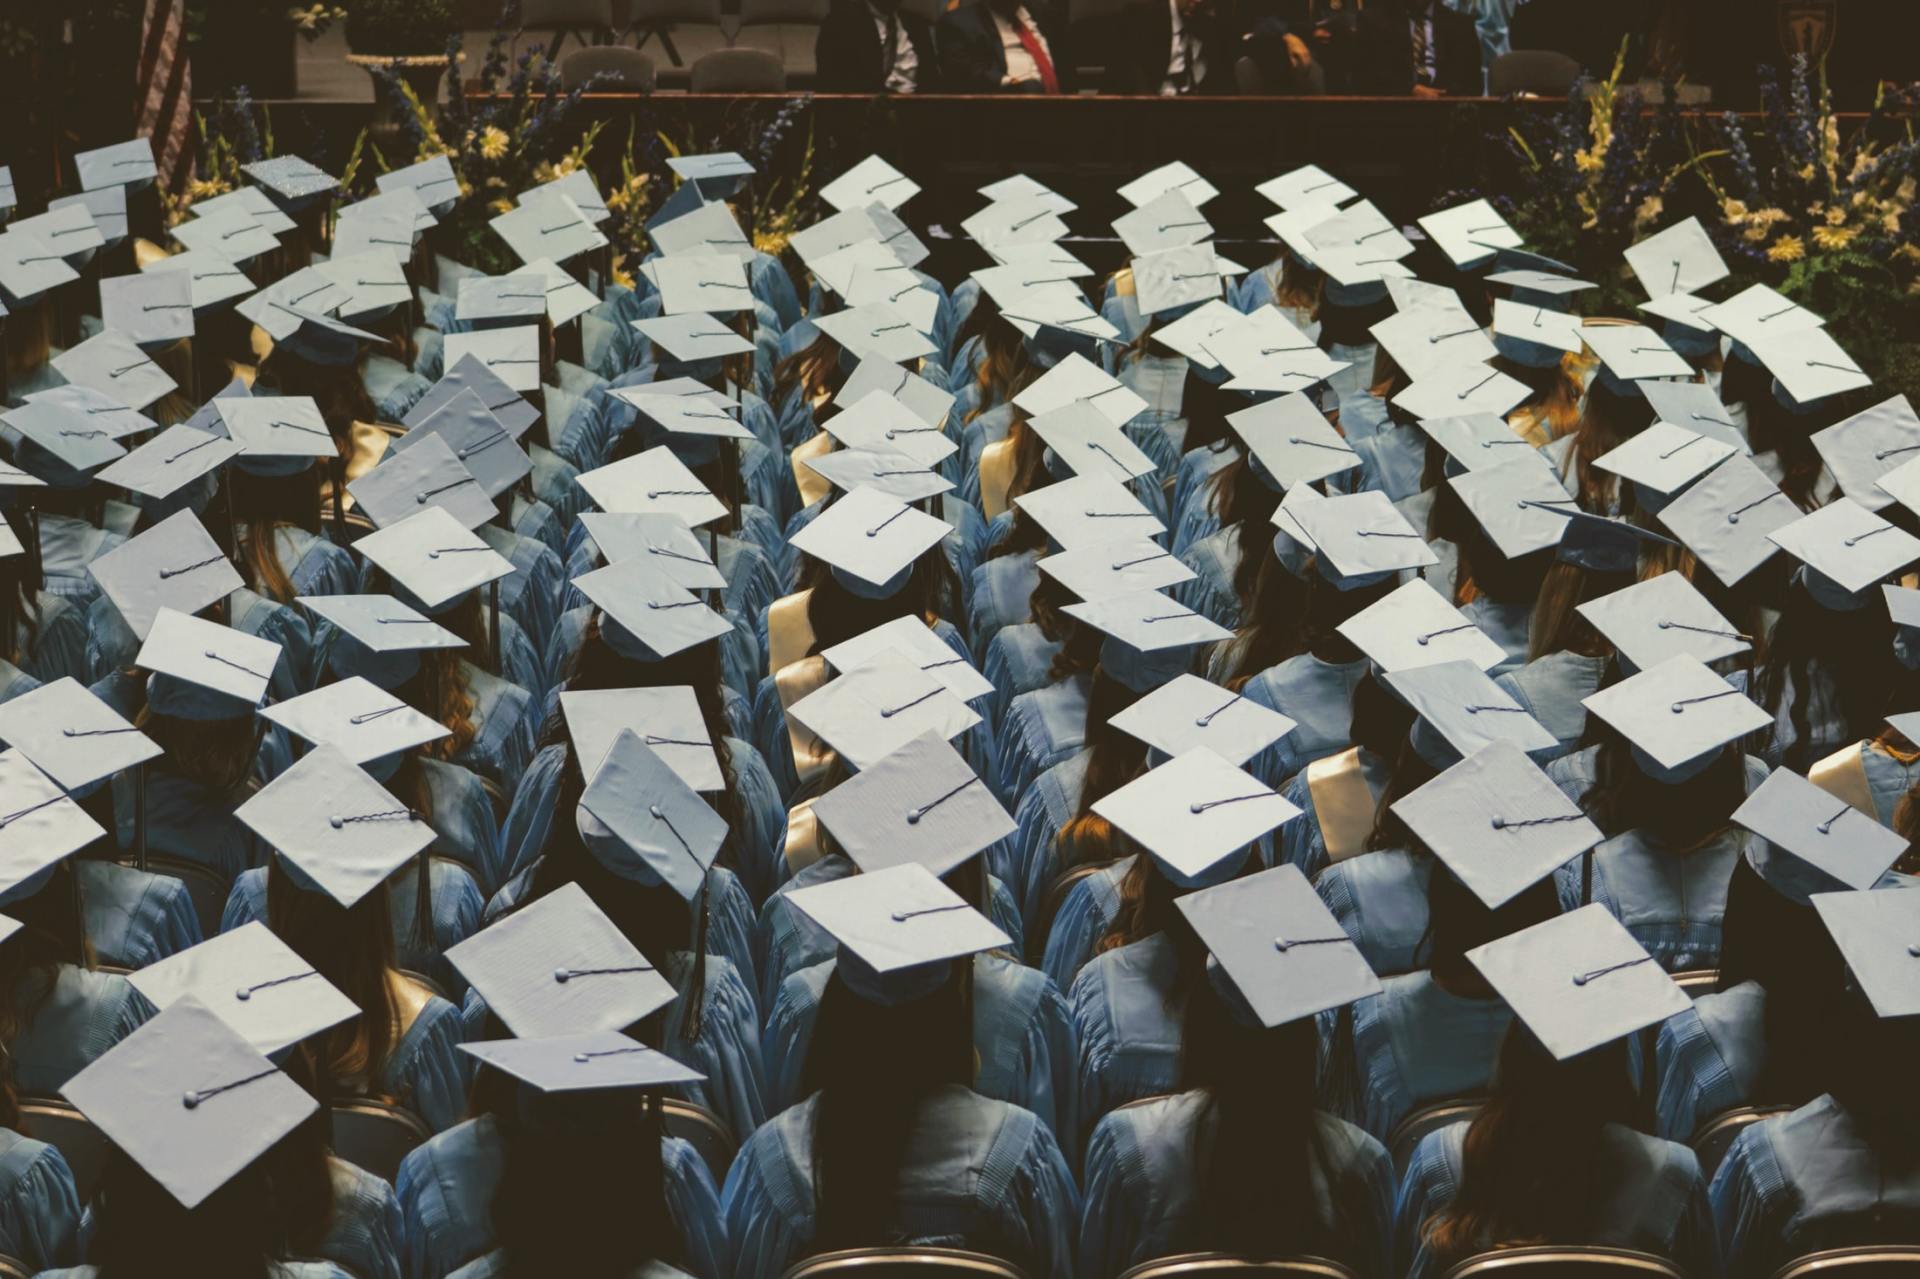 A row of graduation caps are sitting on top of each other in a stadium.